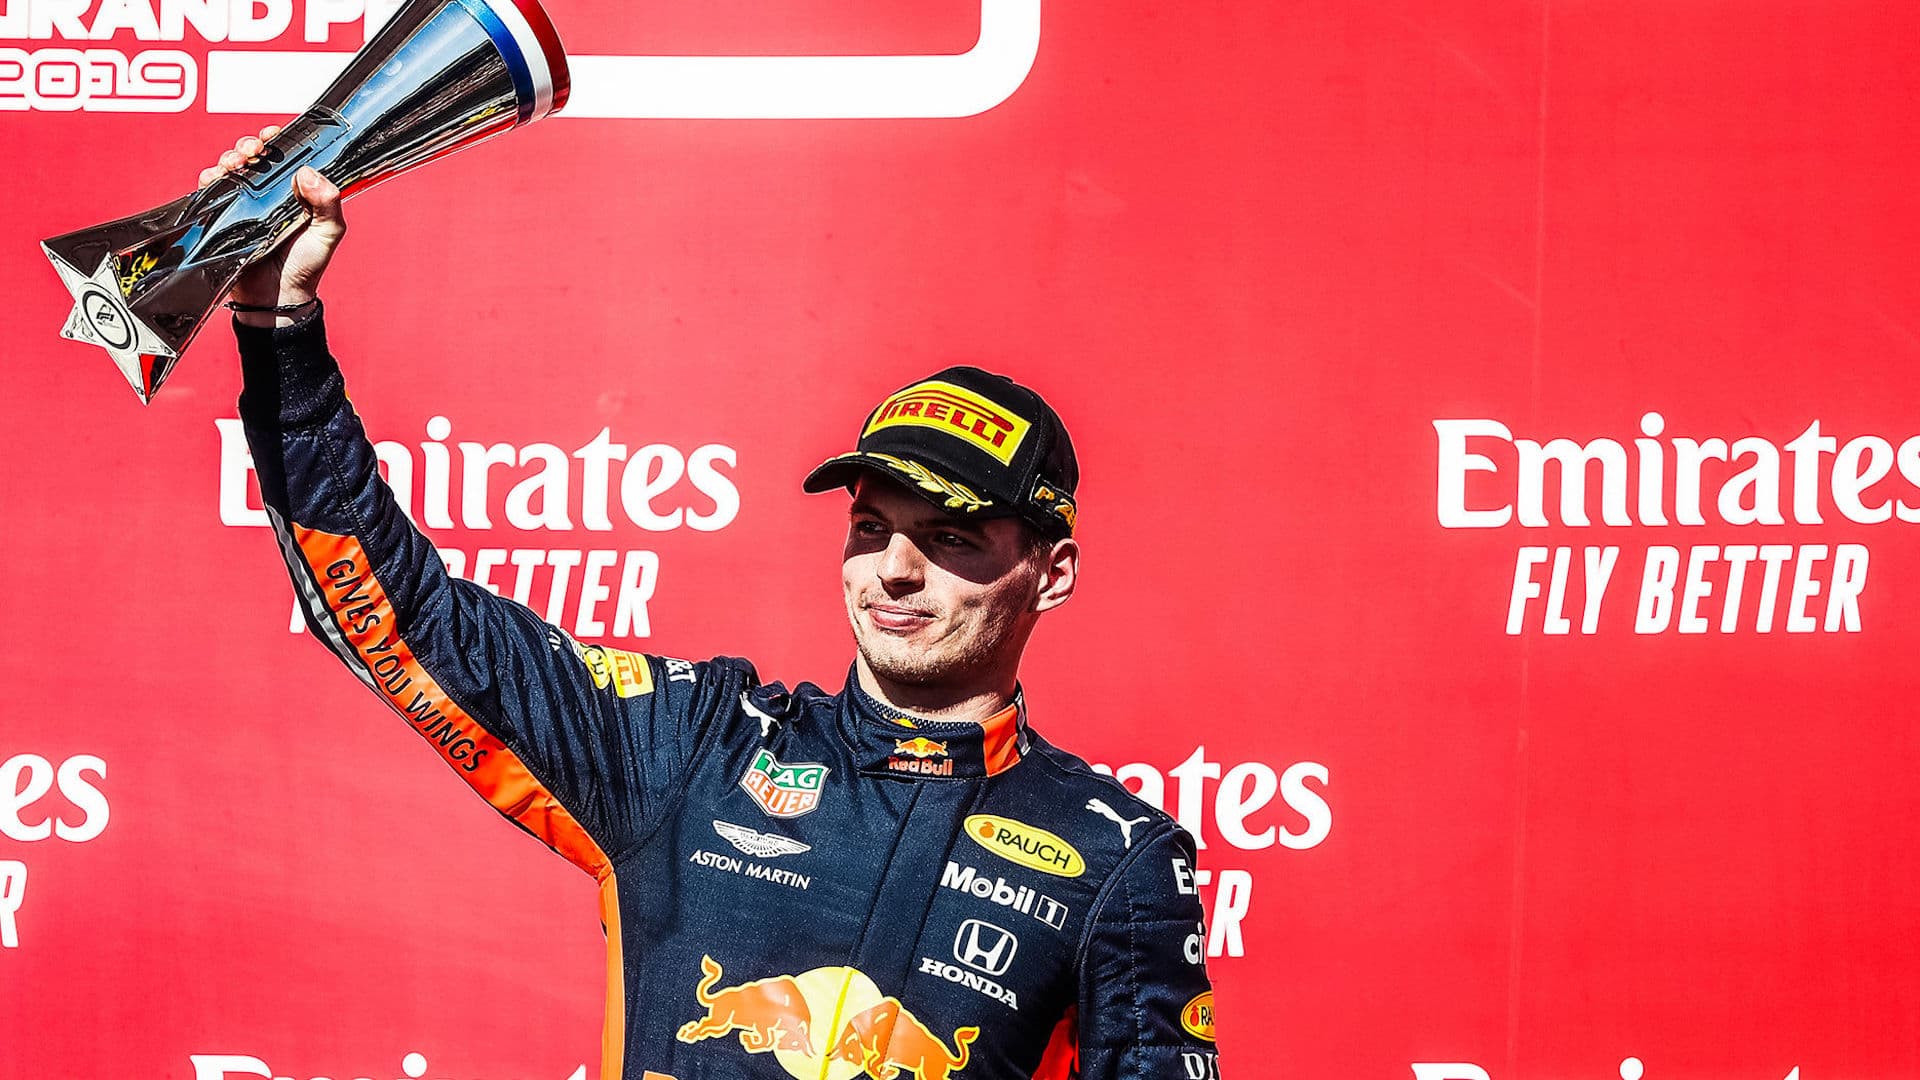 The race is ON F1 driver Max Verstappen to star in online esports event TODAY